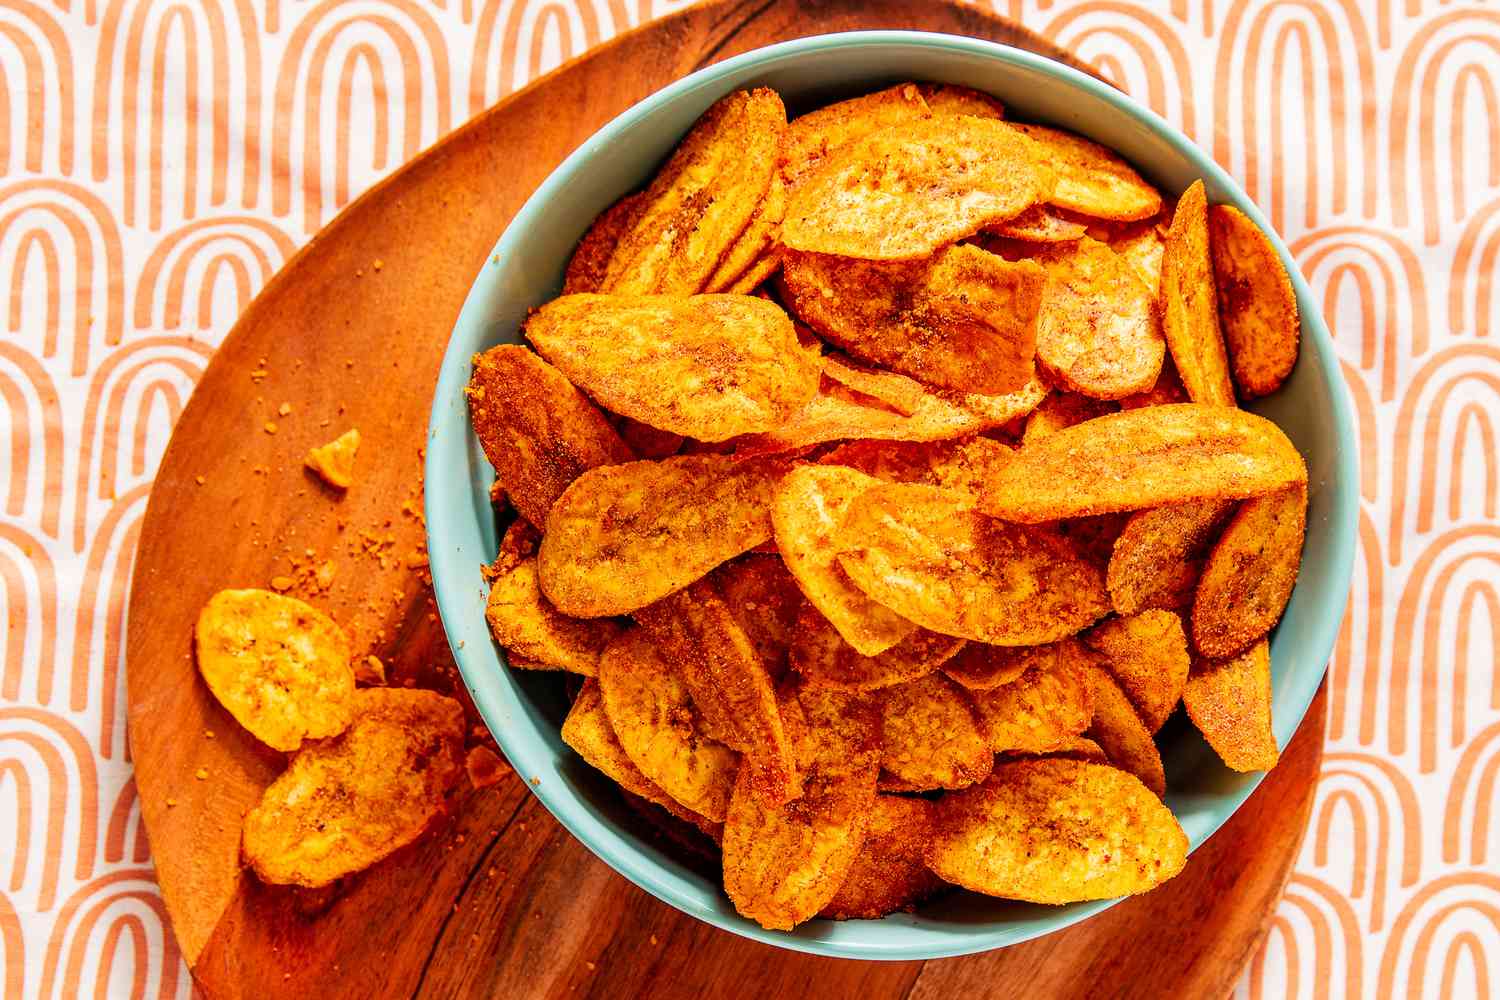 How to make fried spicy plantain chips